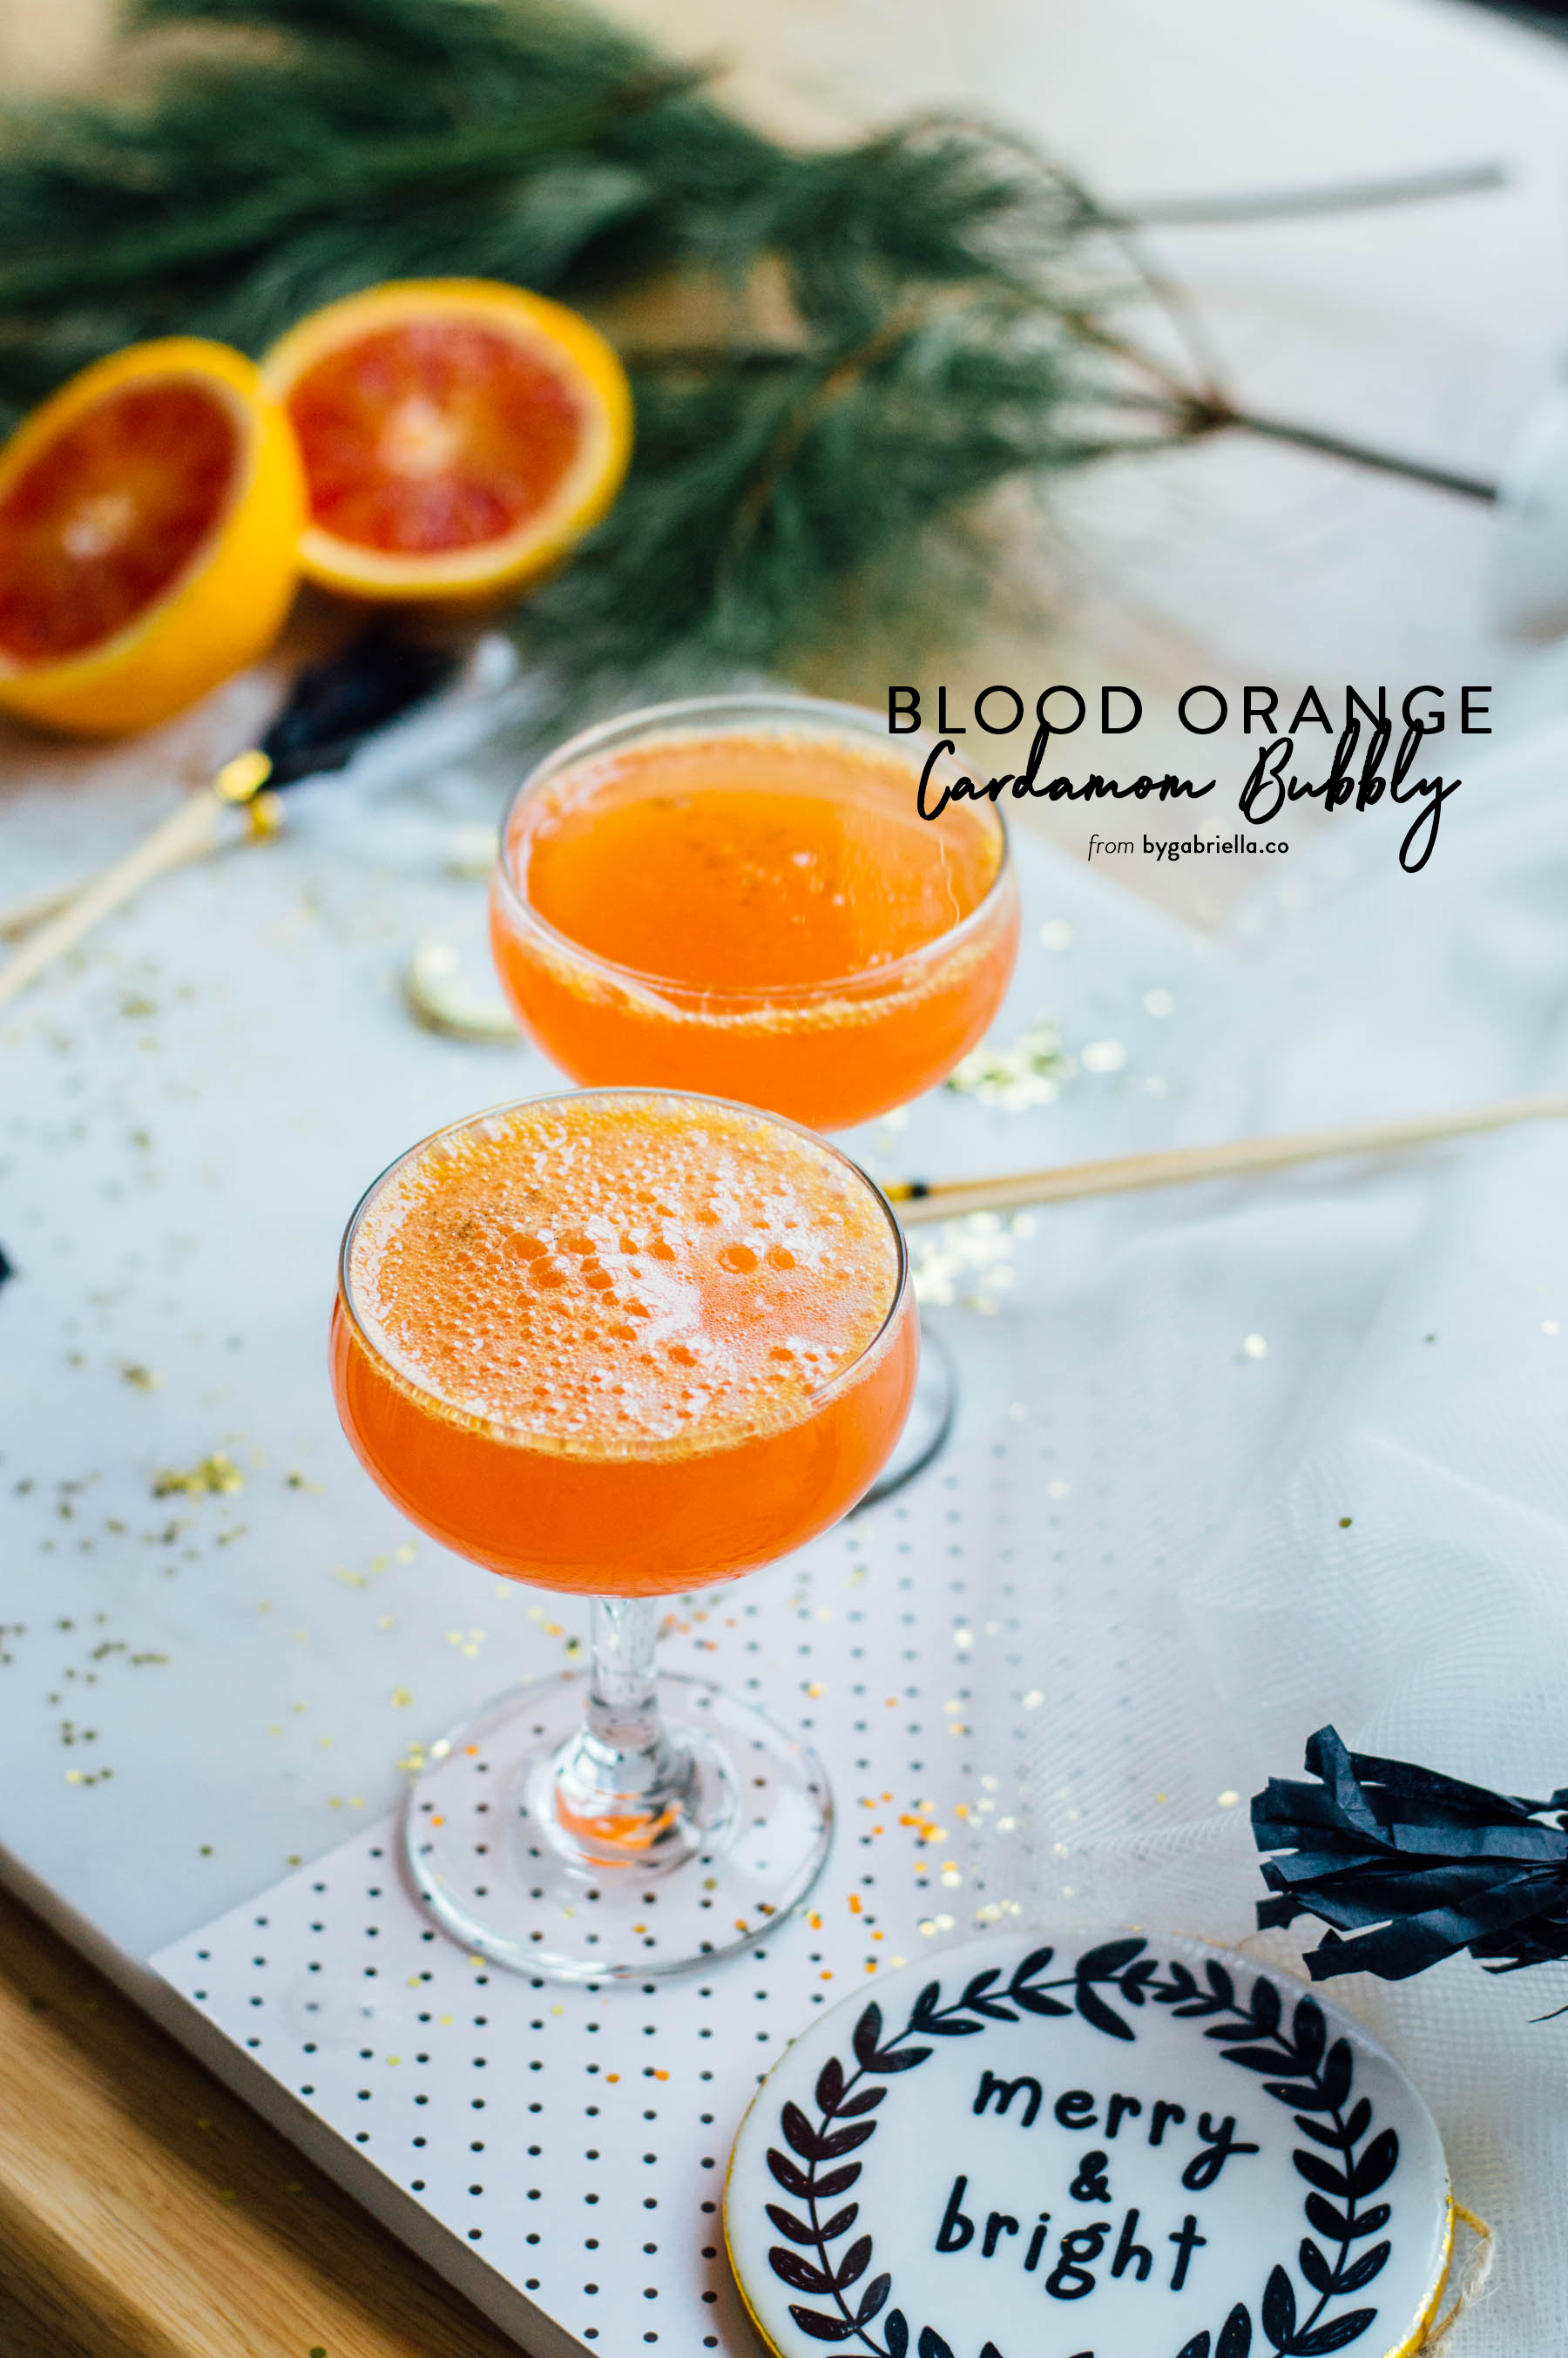 A tasty Blood Orange Cardamom Bubbly cocktail recipe with cava, fresh blood oranges, and a homemade vanilla-cardamom simple syrup. | full recipe at bygabriella.co